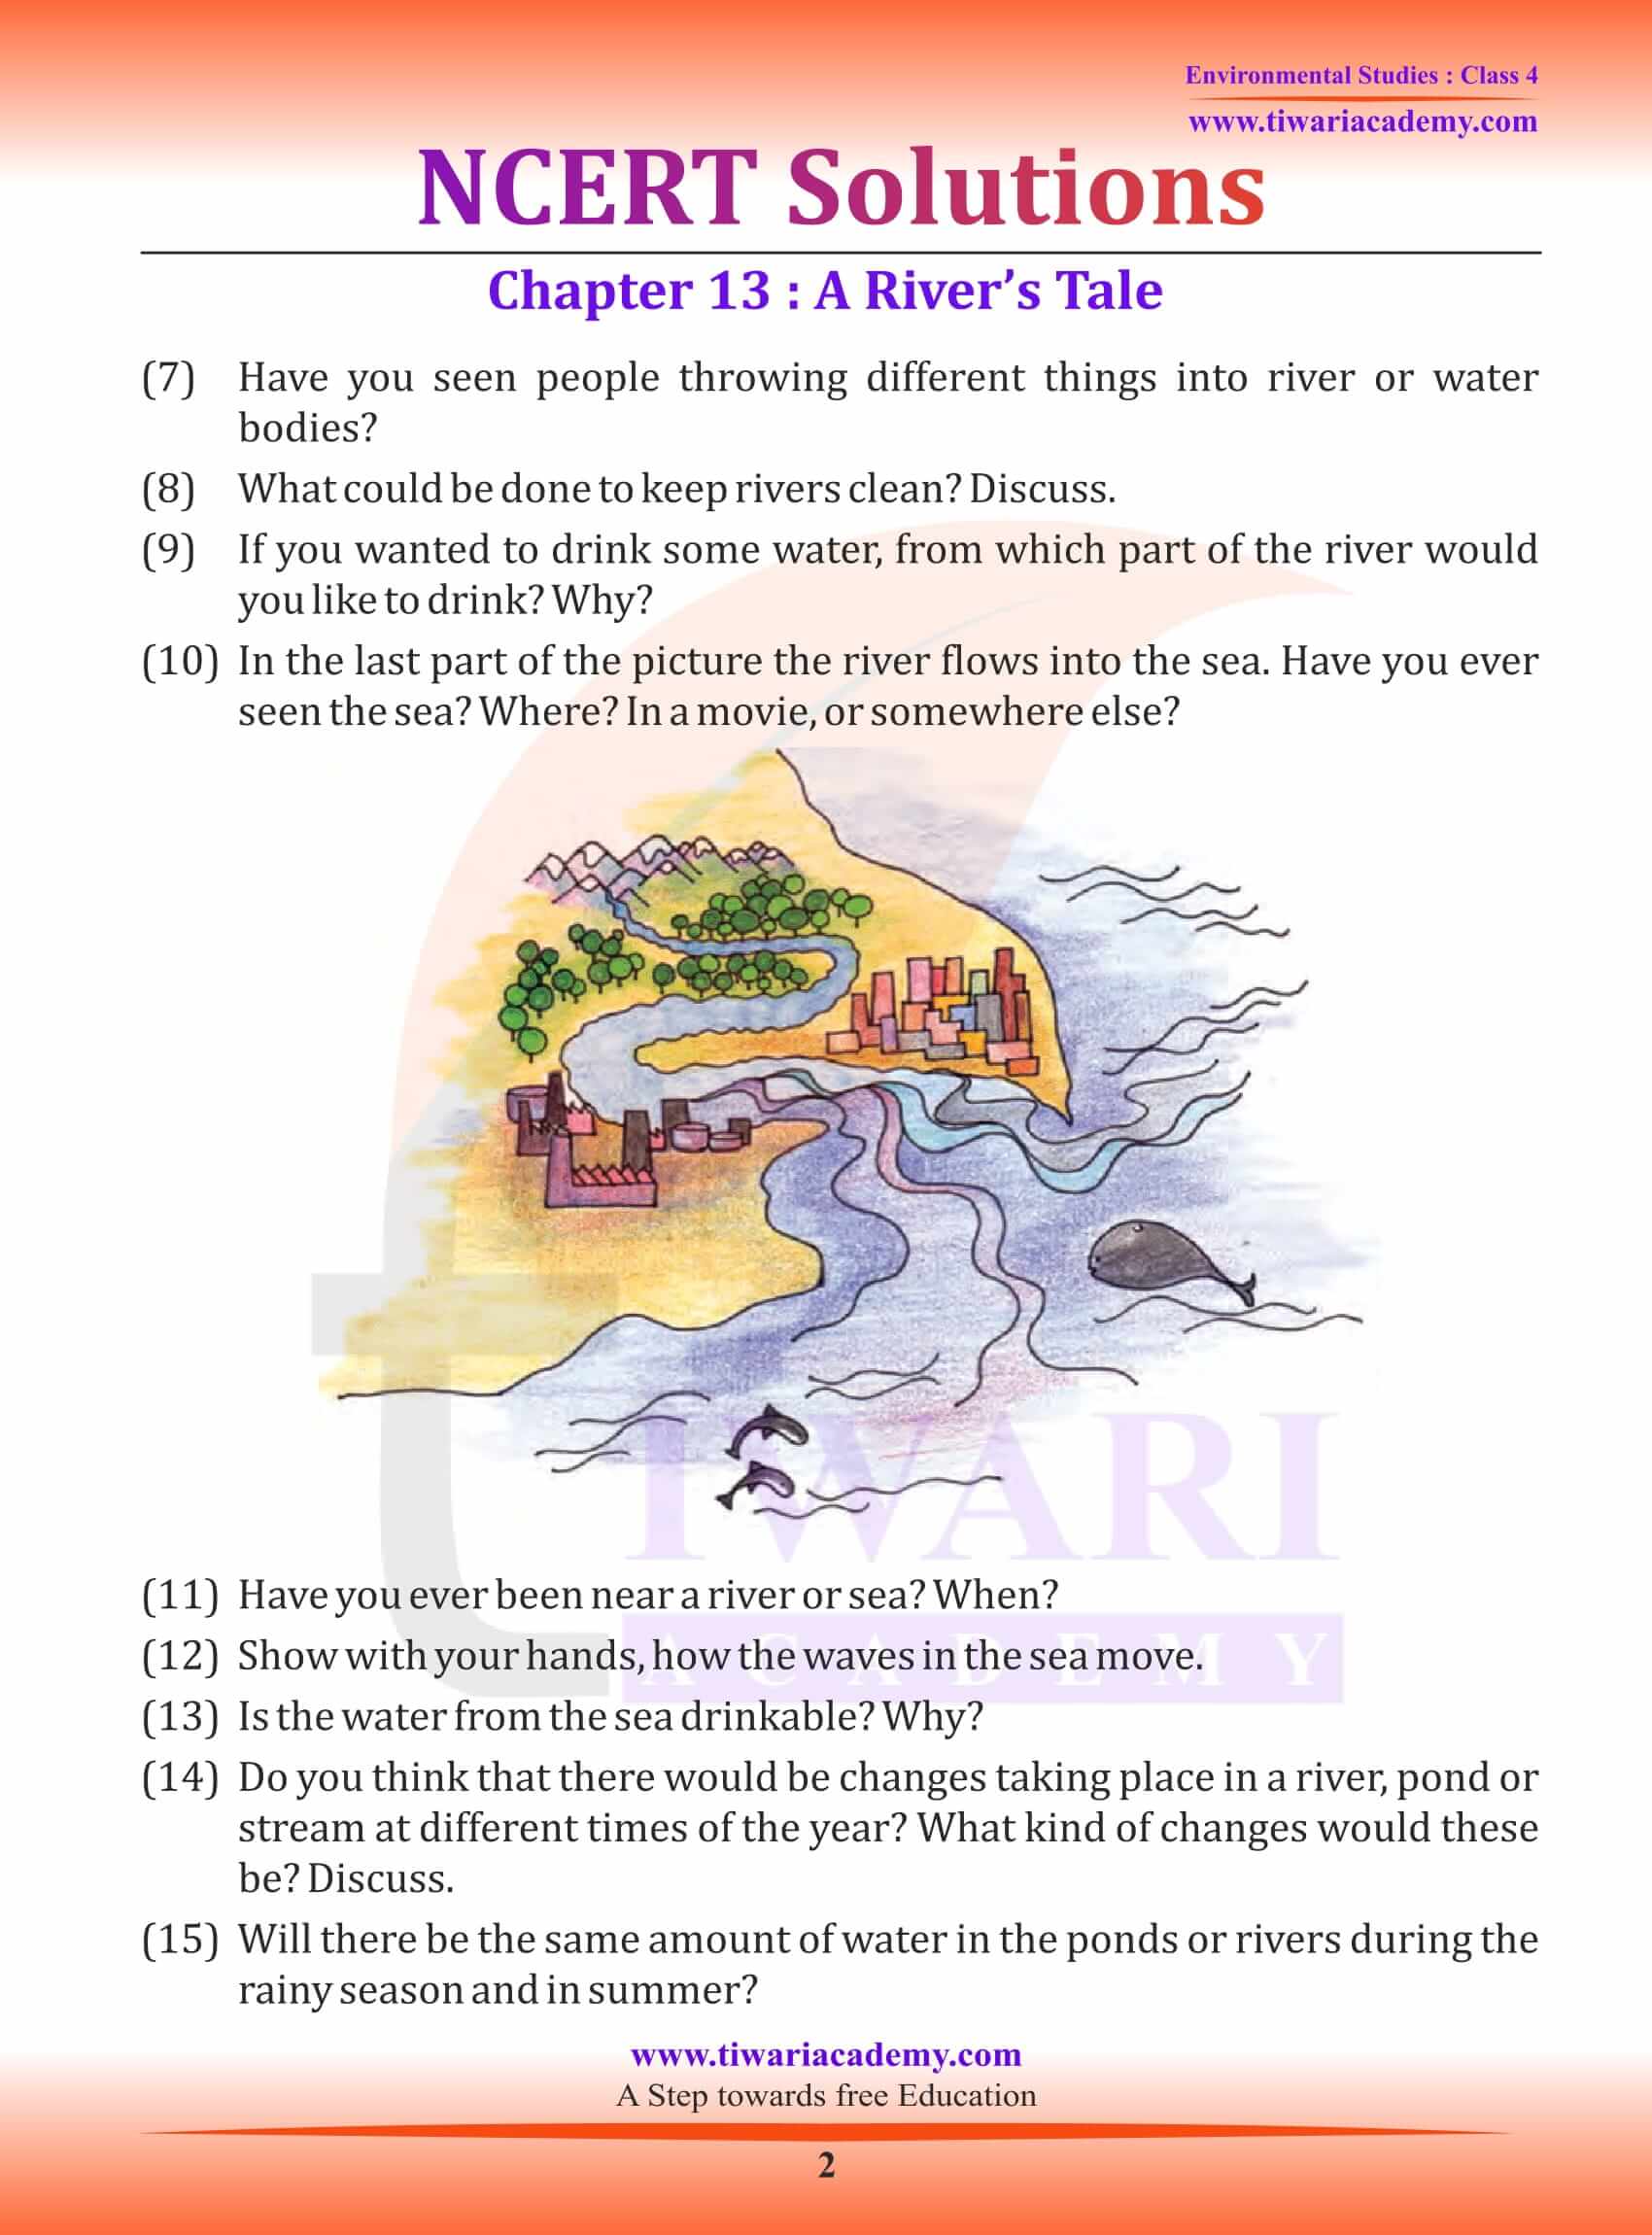 NCERT Solutions for Class 4 EVS Chapter 13